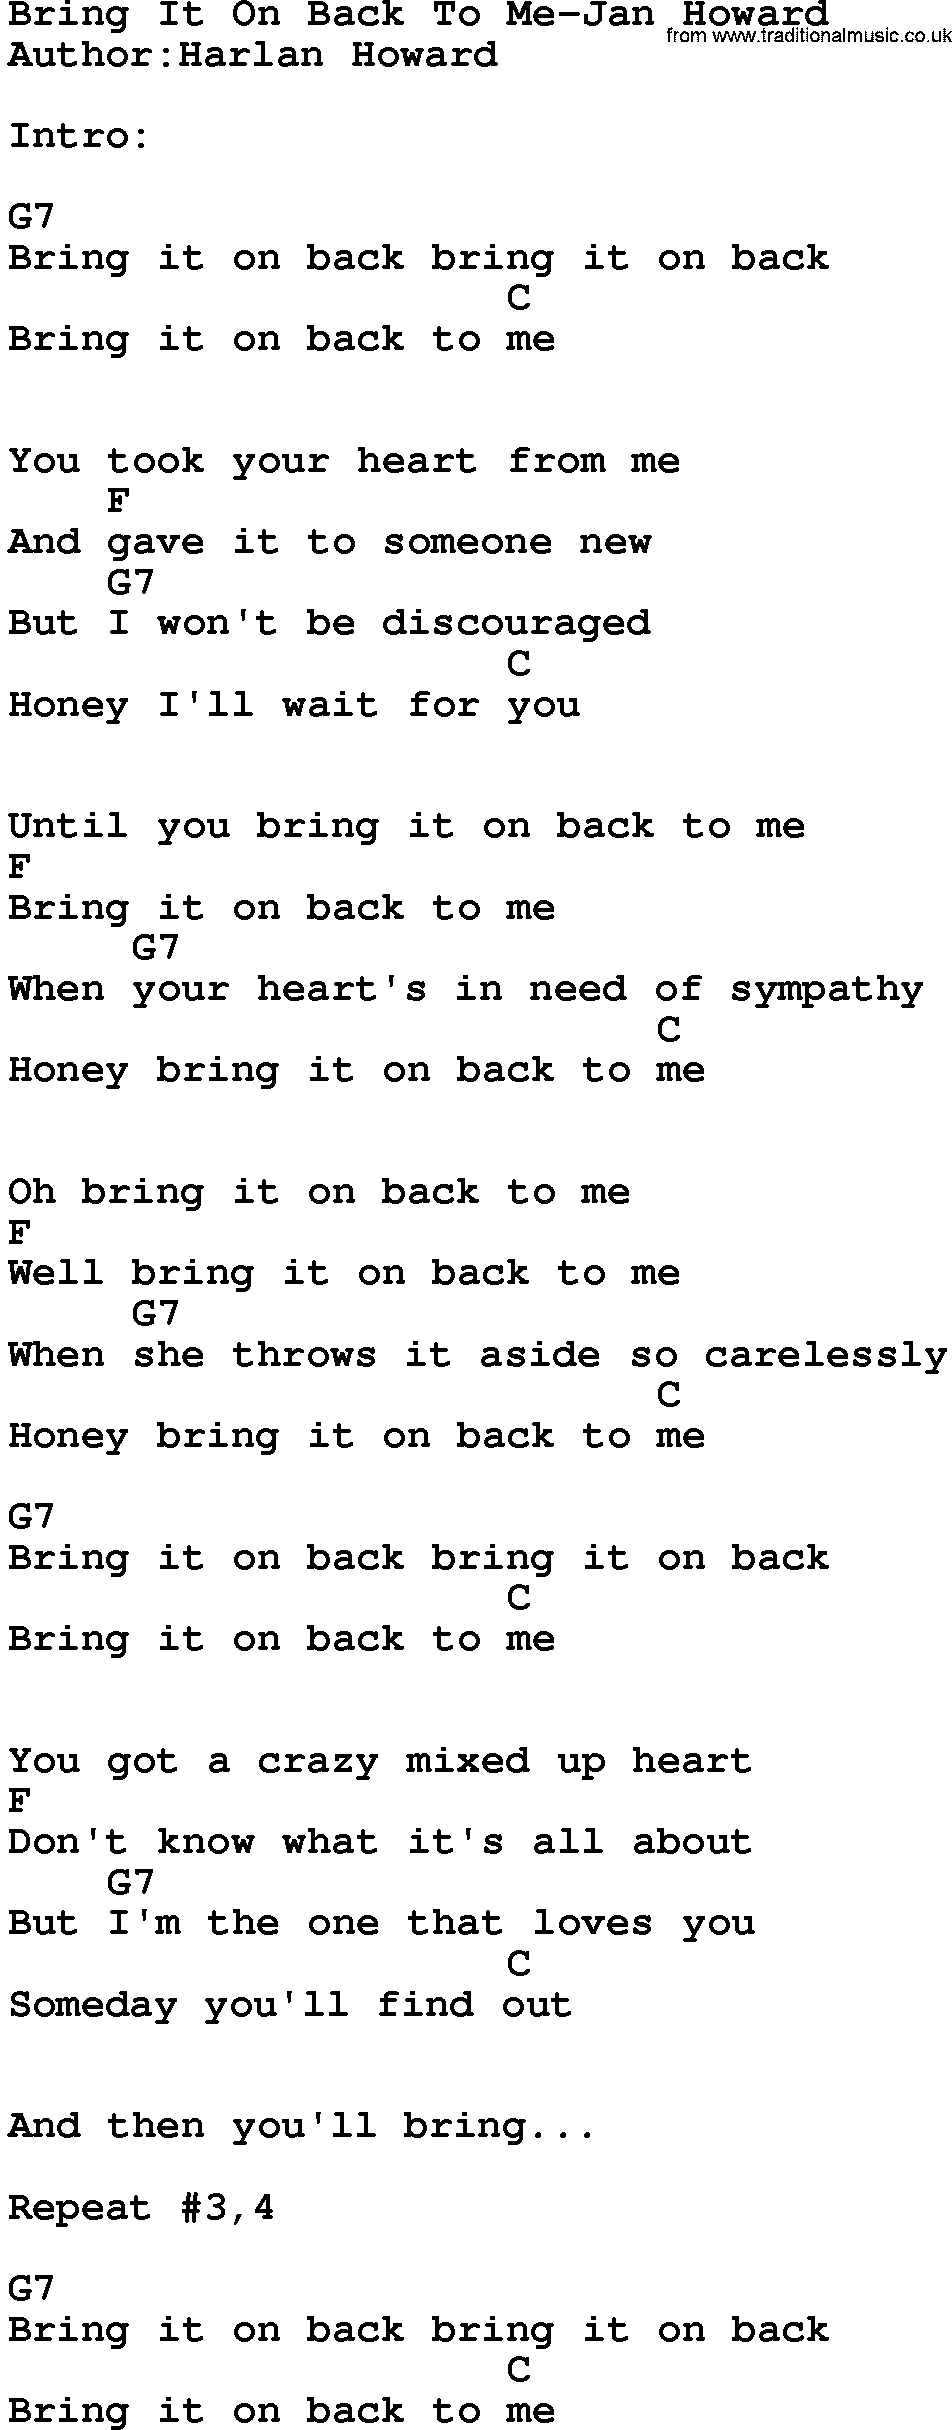 Country music song: Bring It On Back To Me-Jan Howard lyrics and chords